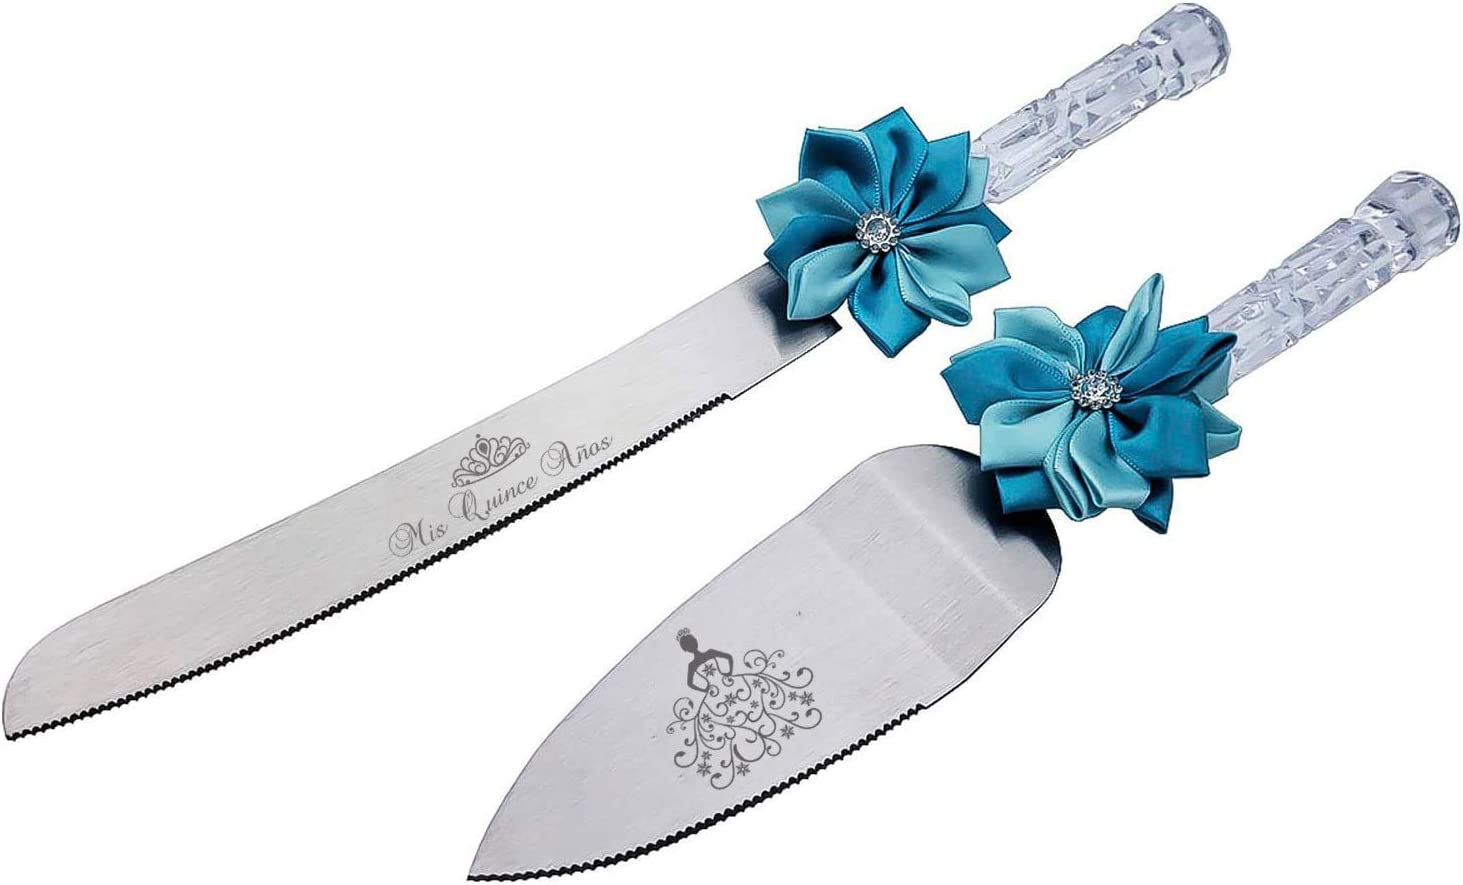 GIFTS INFINITY - Personalized Wedding Cake Knife & Server Set with Blue flower bow